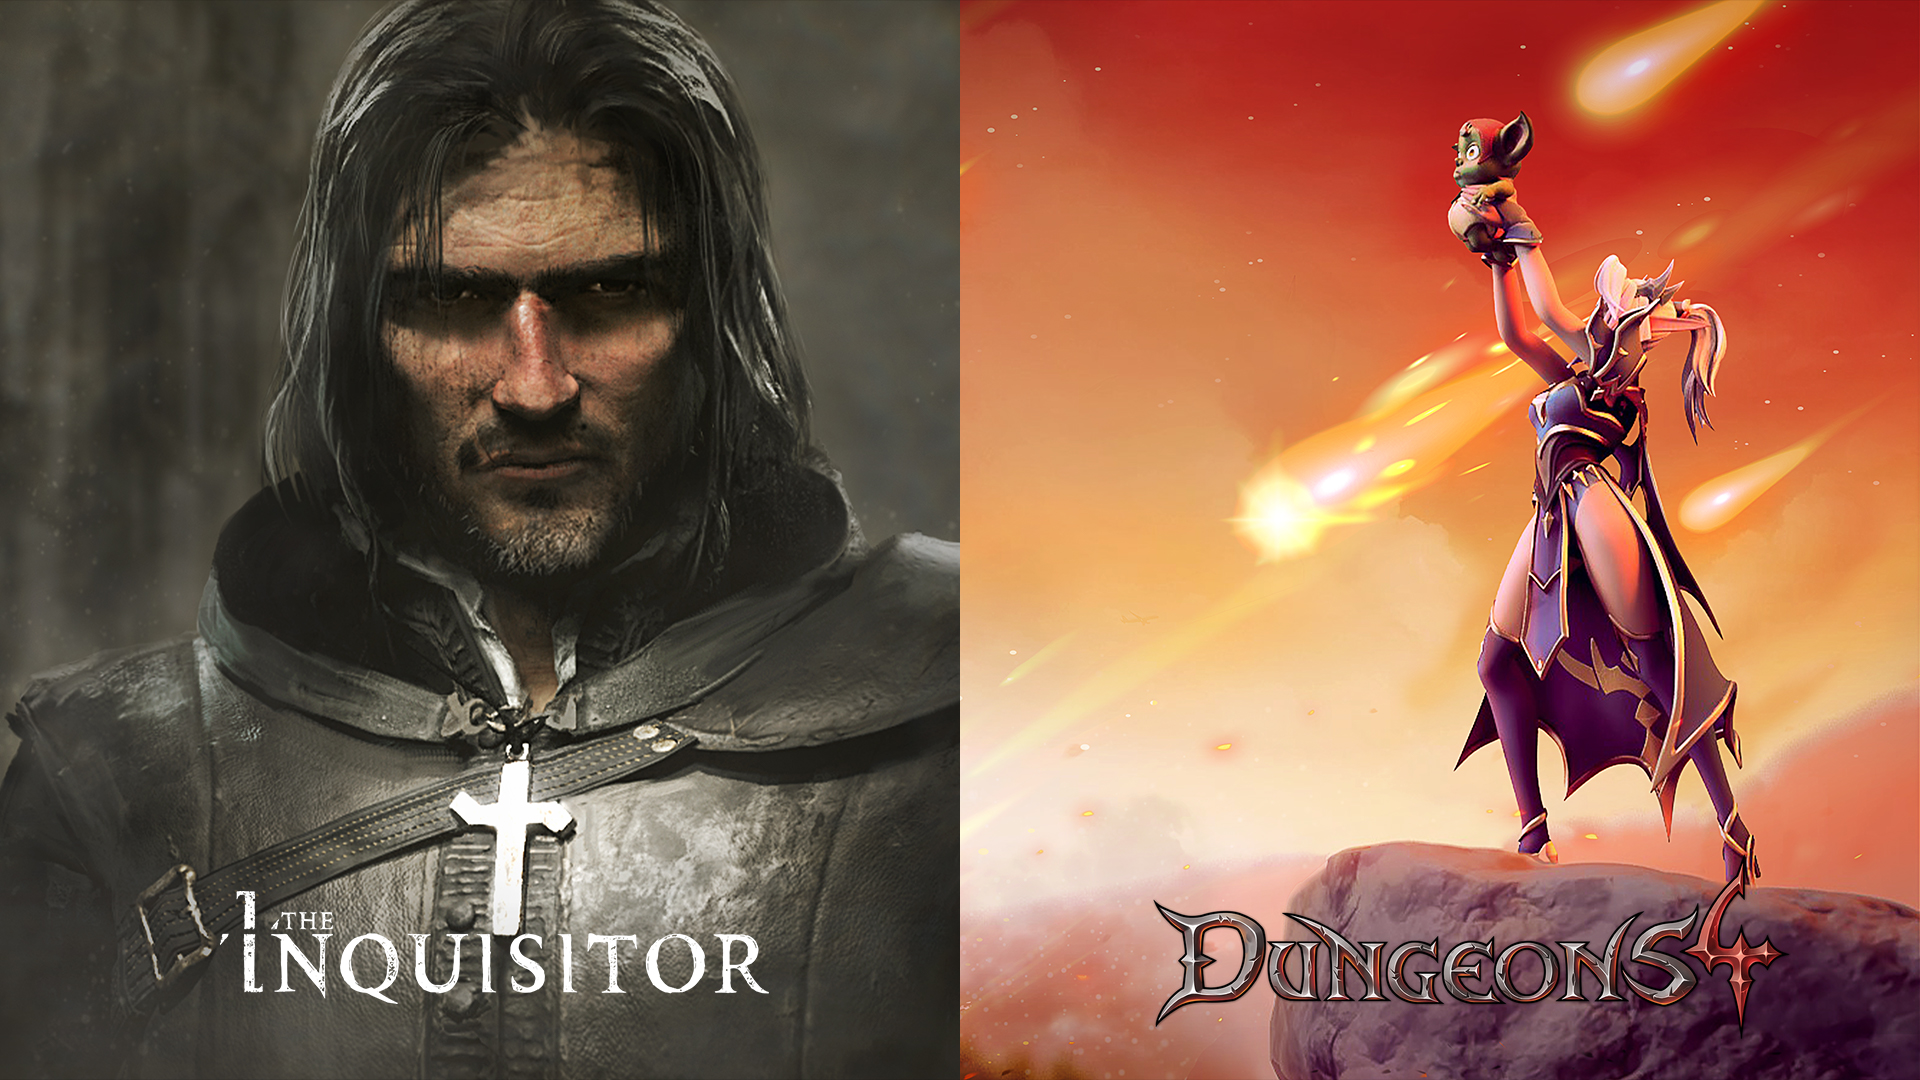 Kalypso media releases demos for The Inquisitor and Dungeons 4